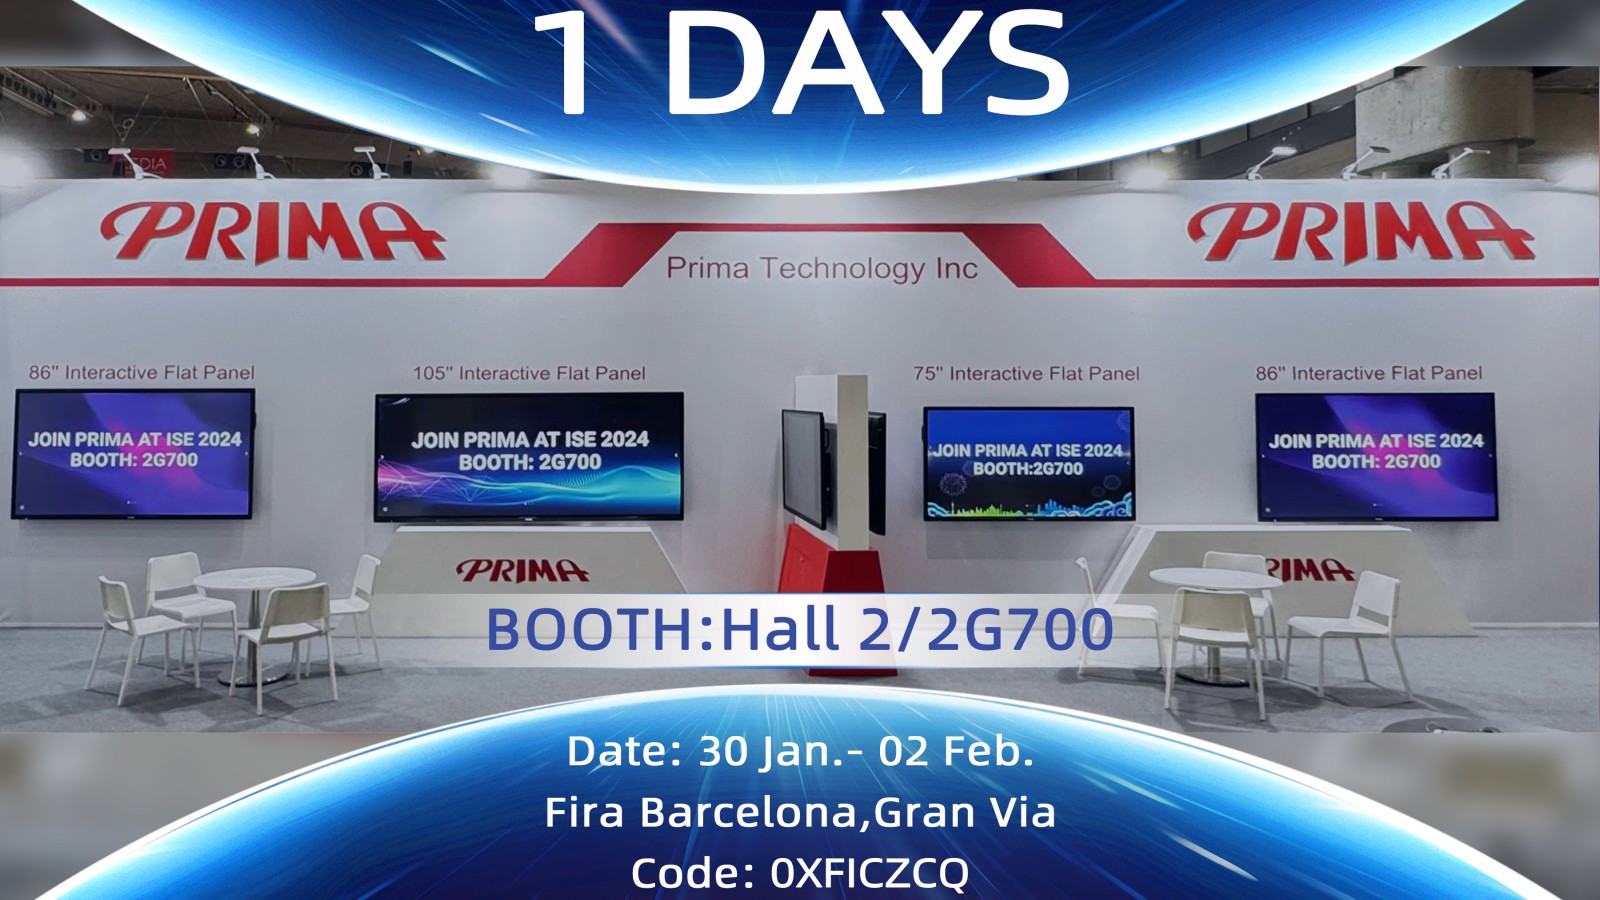 See you tomorrow! We sincerely welcome you to come for further communication at ISE 2024